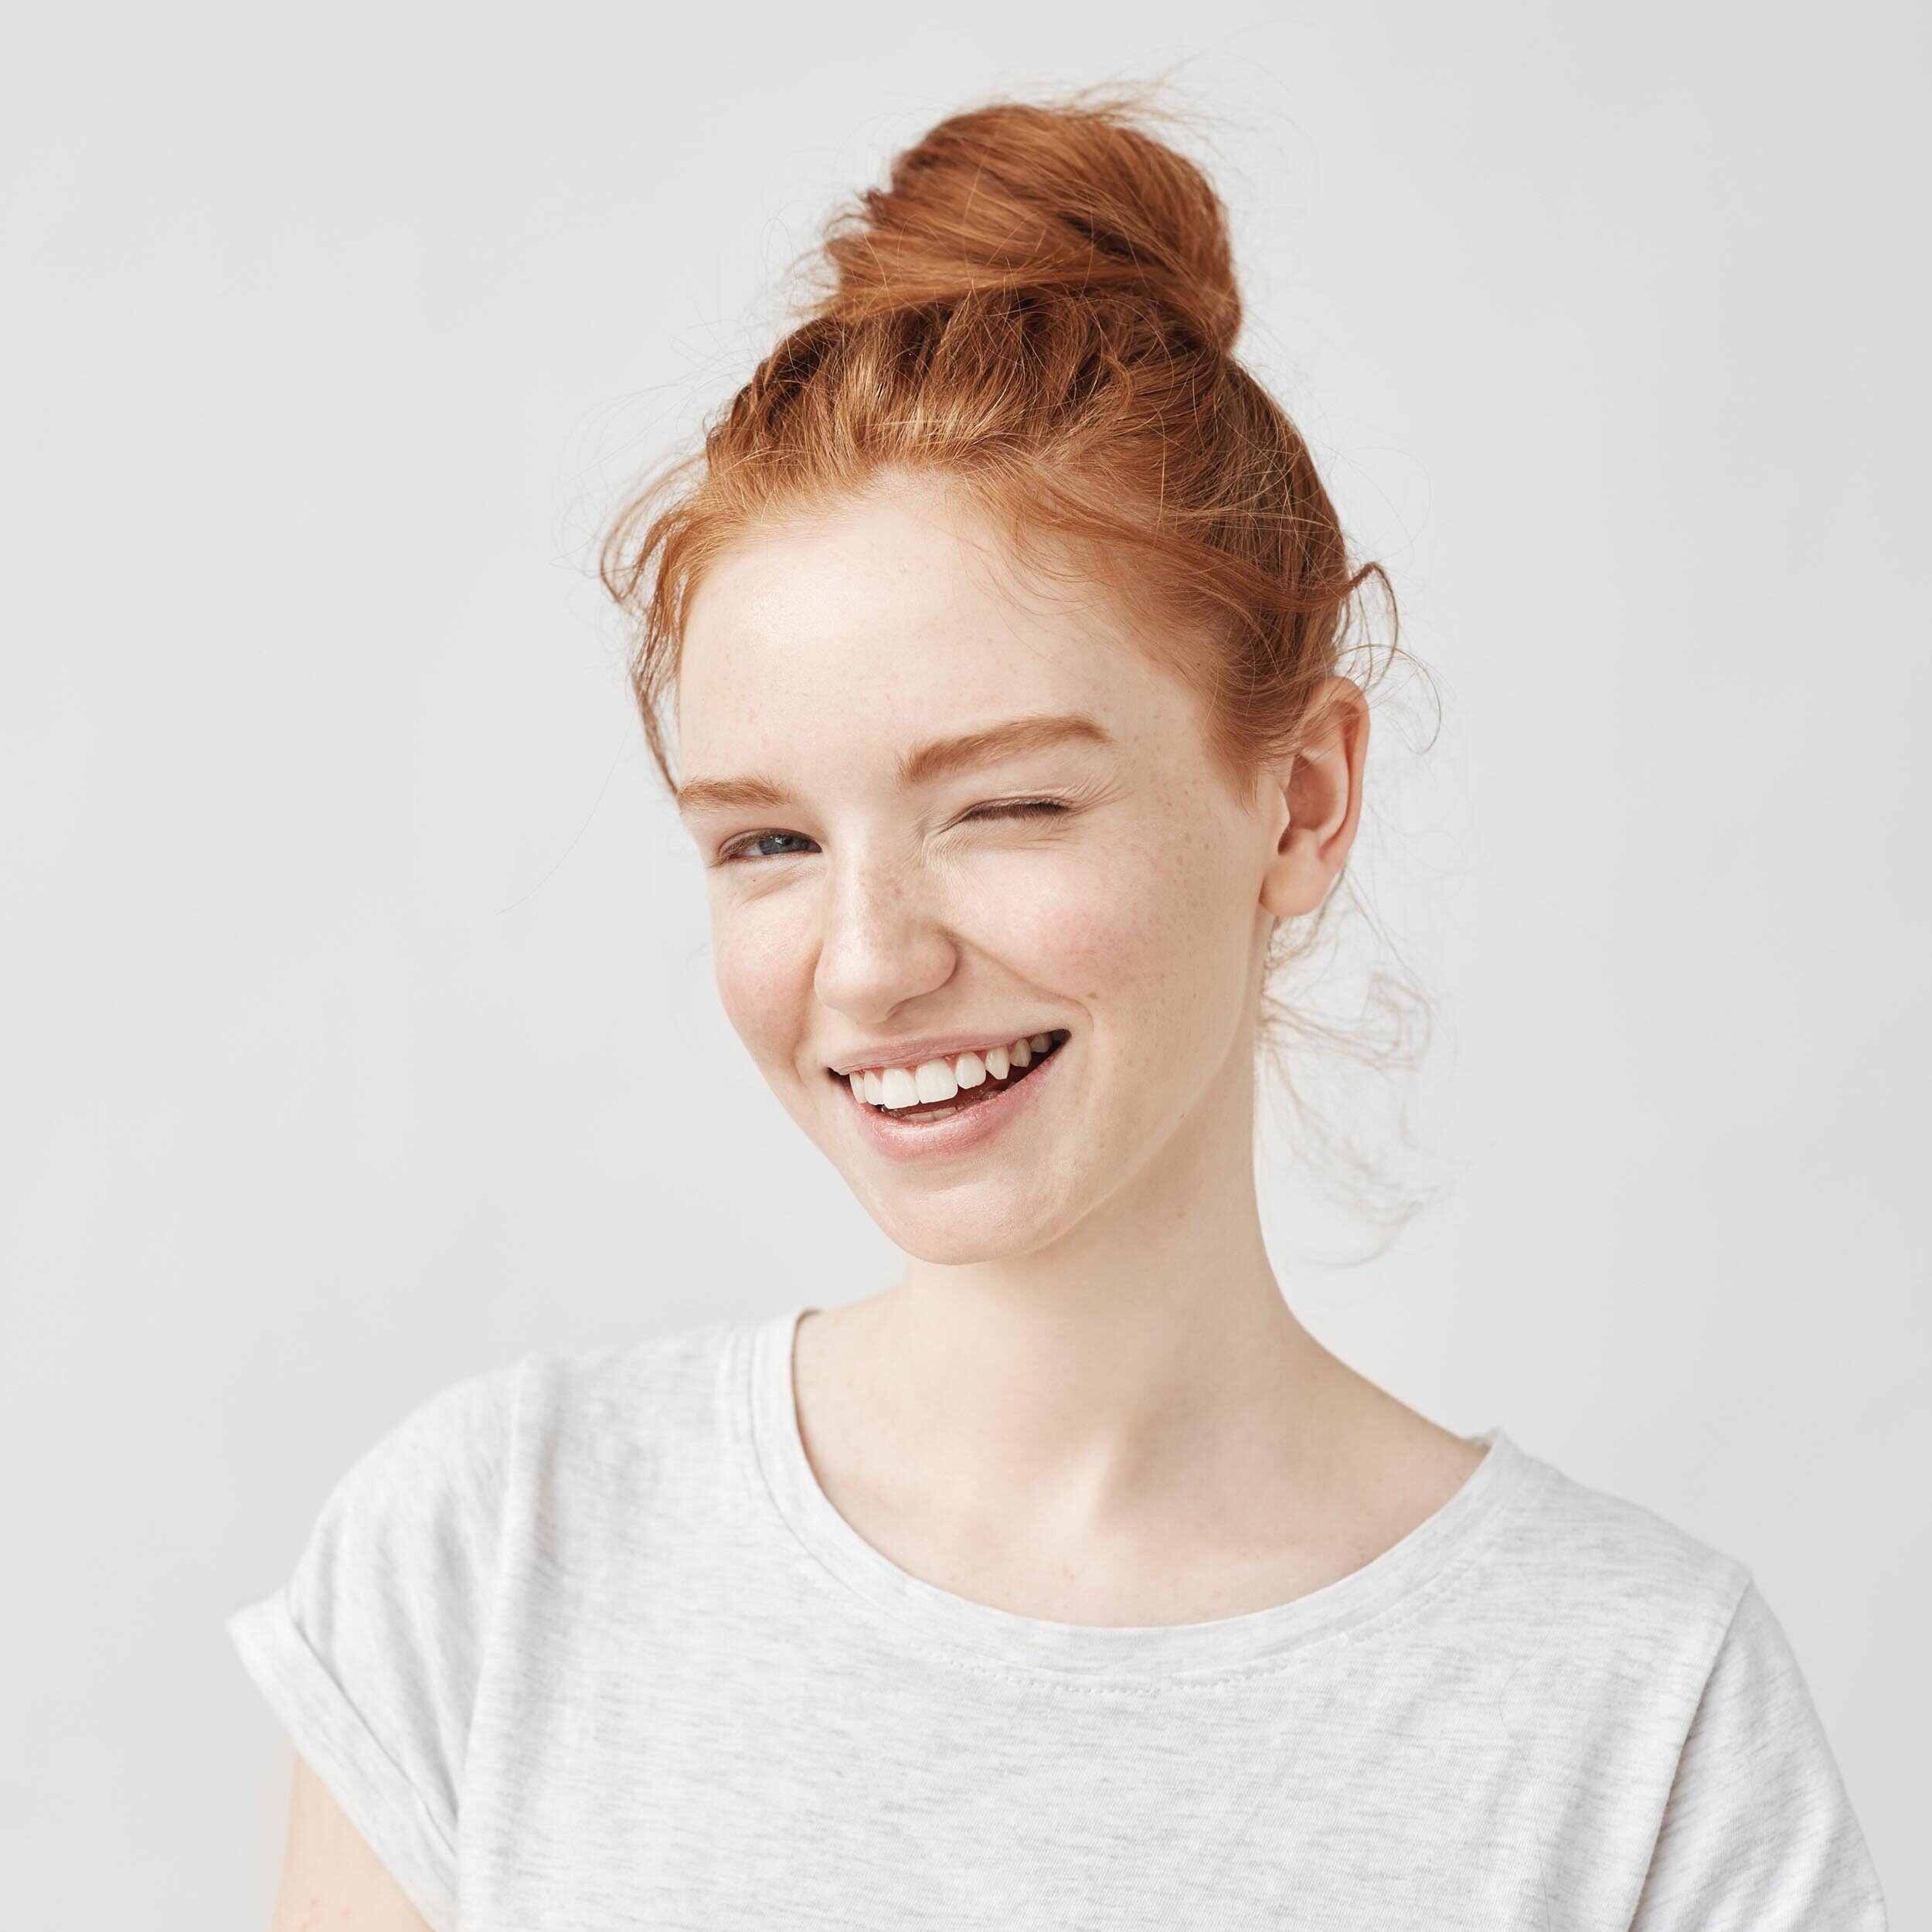 Young woman with red hair tied in a bun, winking and smiling, wearing a light gray t-shirt on a white background.